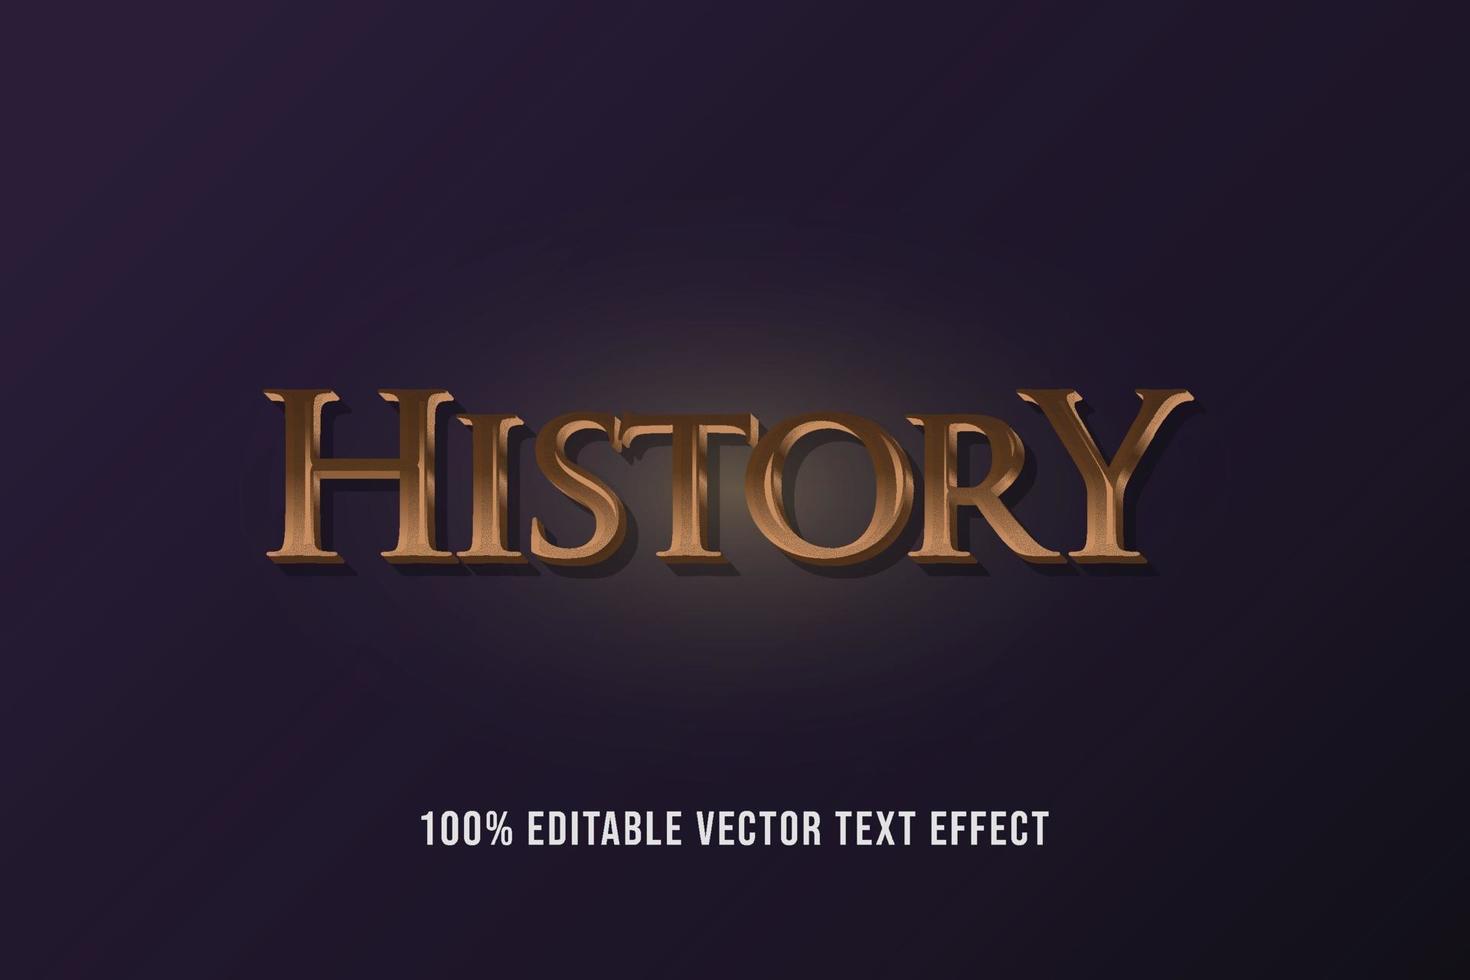 history text effect graphic style, editable gold text effect vector